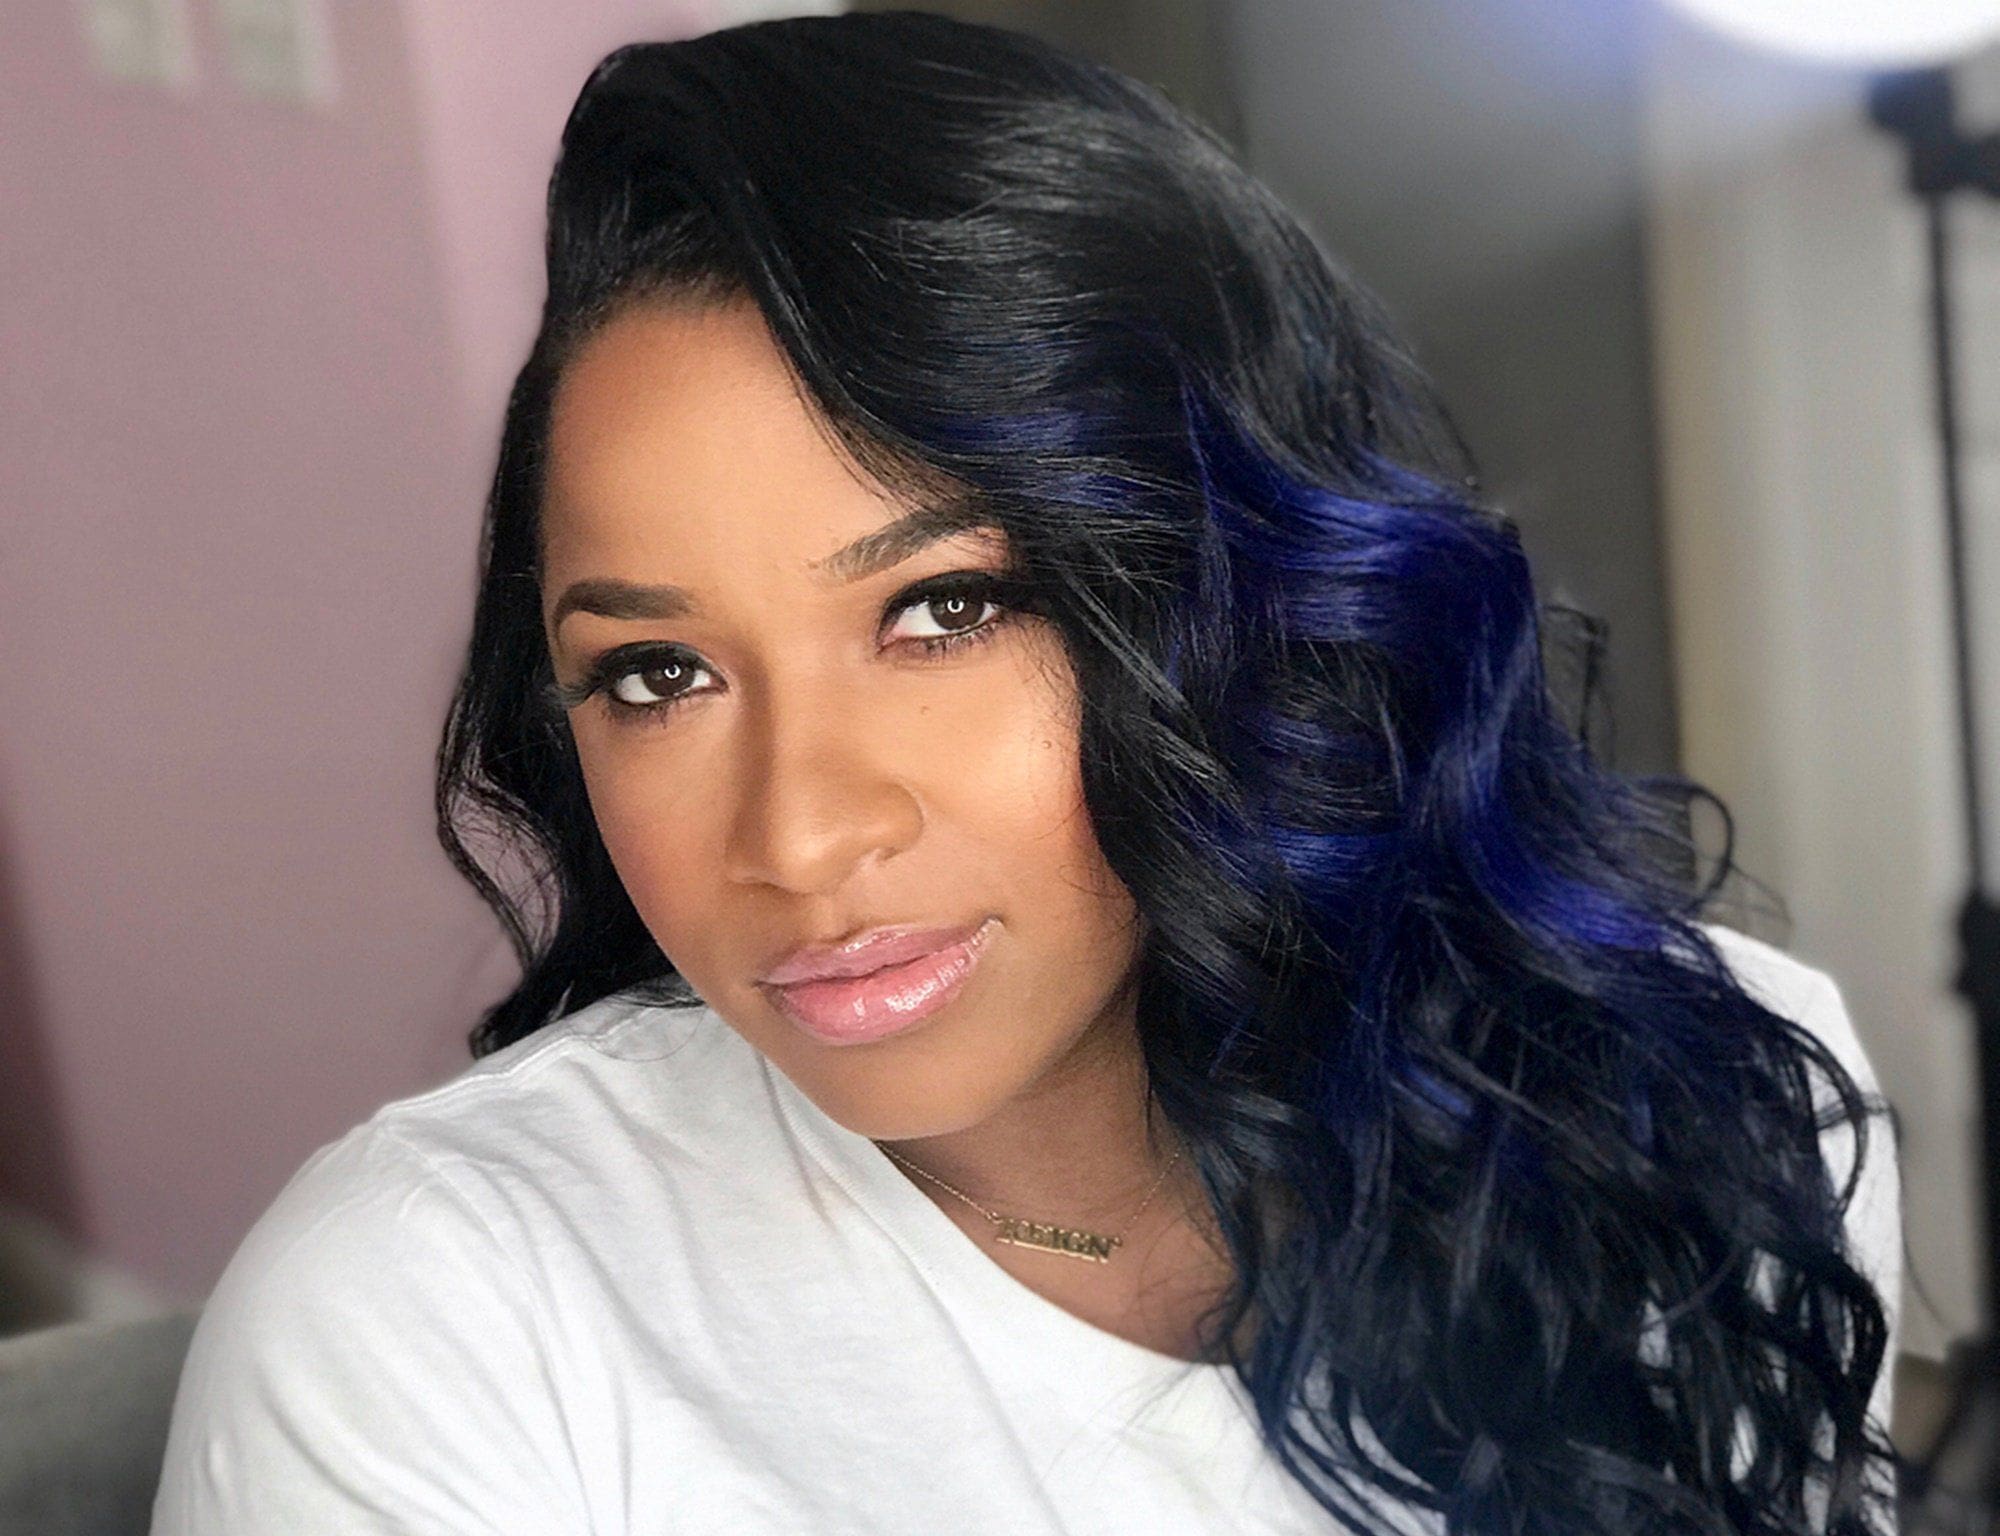 https://celebrityinsider.org/toya-wright-reveals-the-three-cities-left-on-the-weight-no-more-tour-305360/